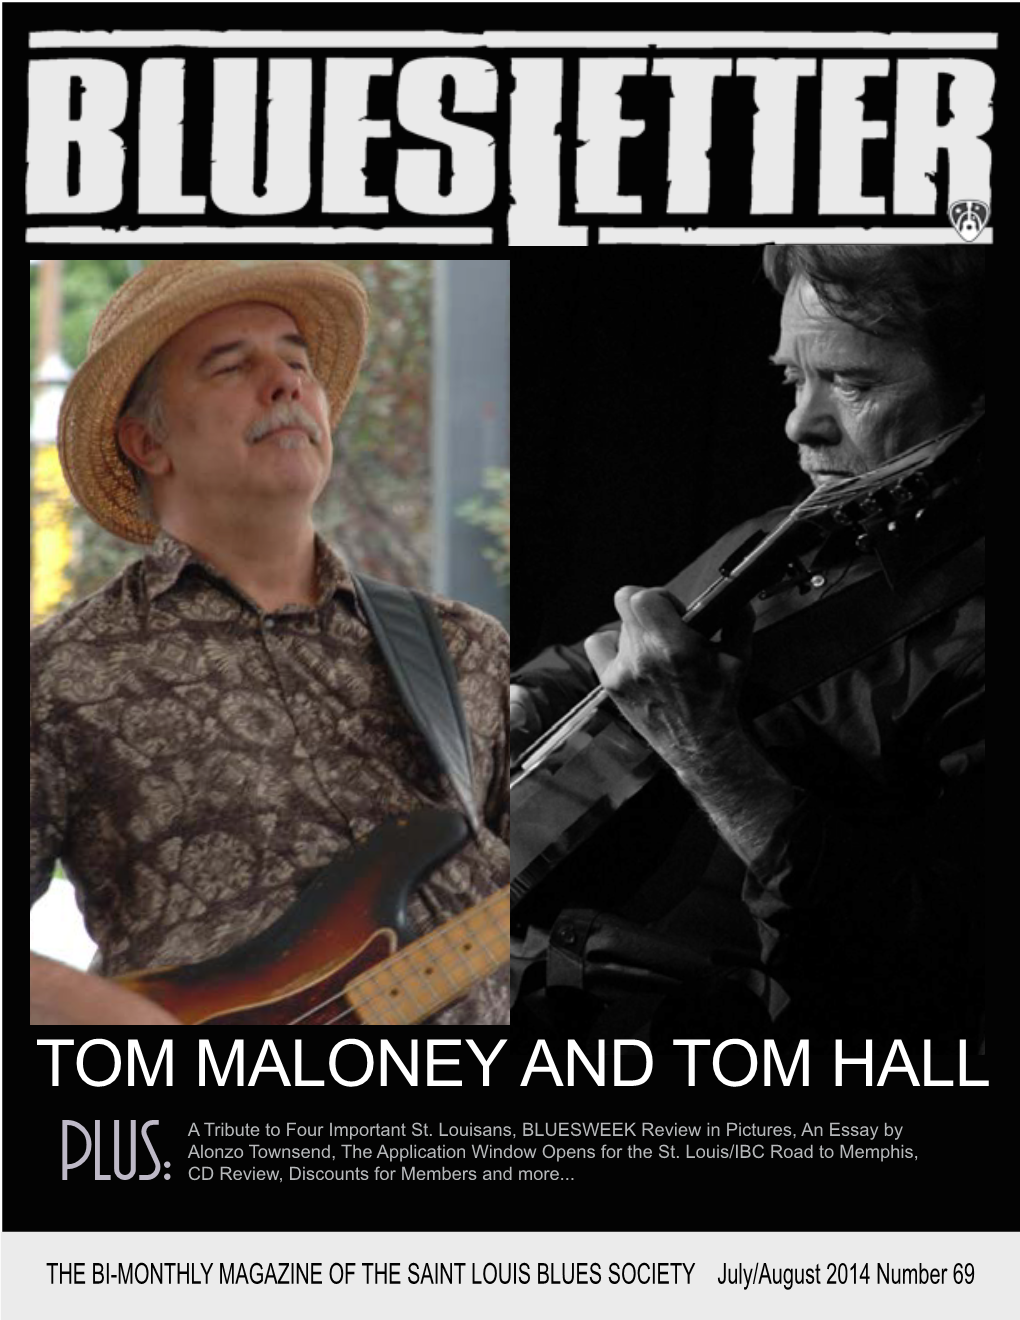 TOM MALONEY and TOM HALL a Tribute to Four Important St